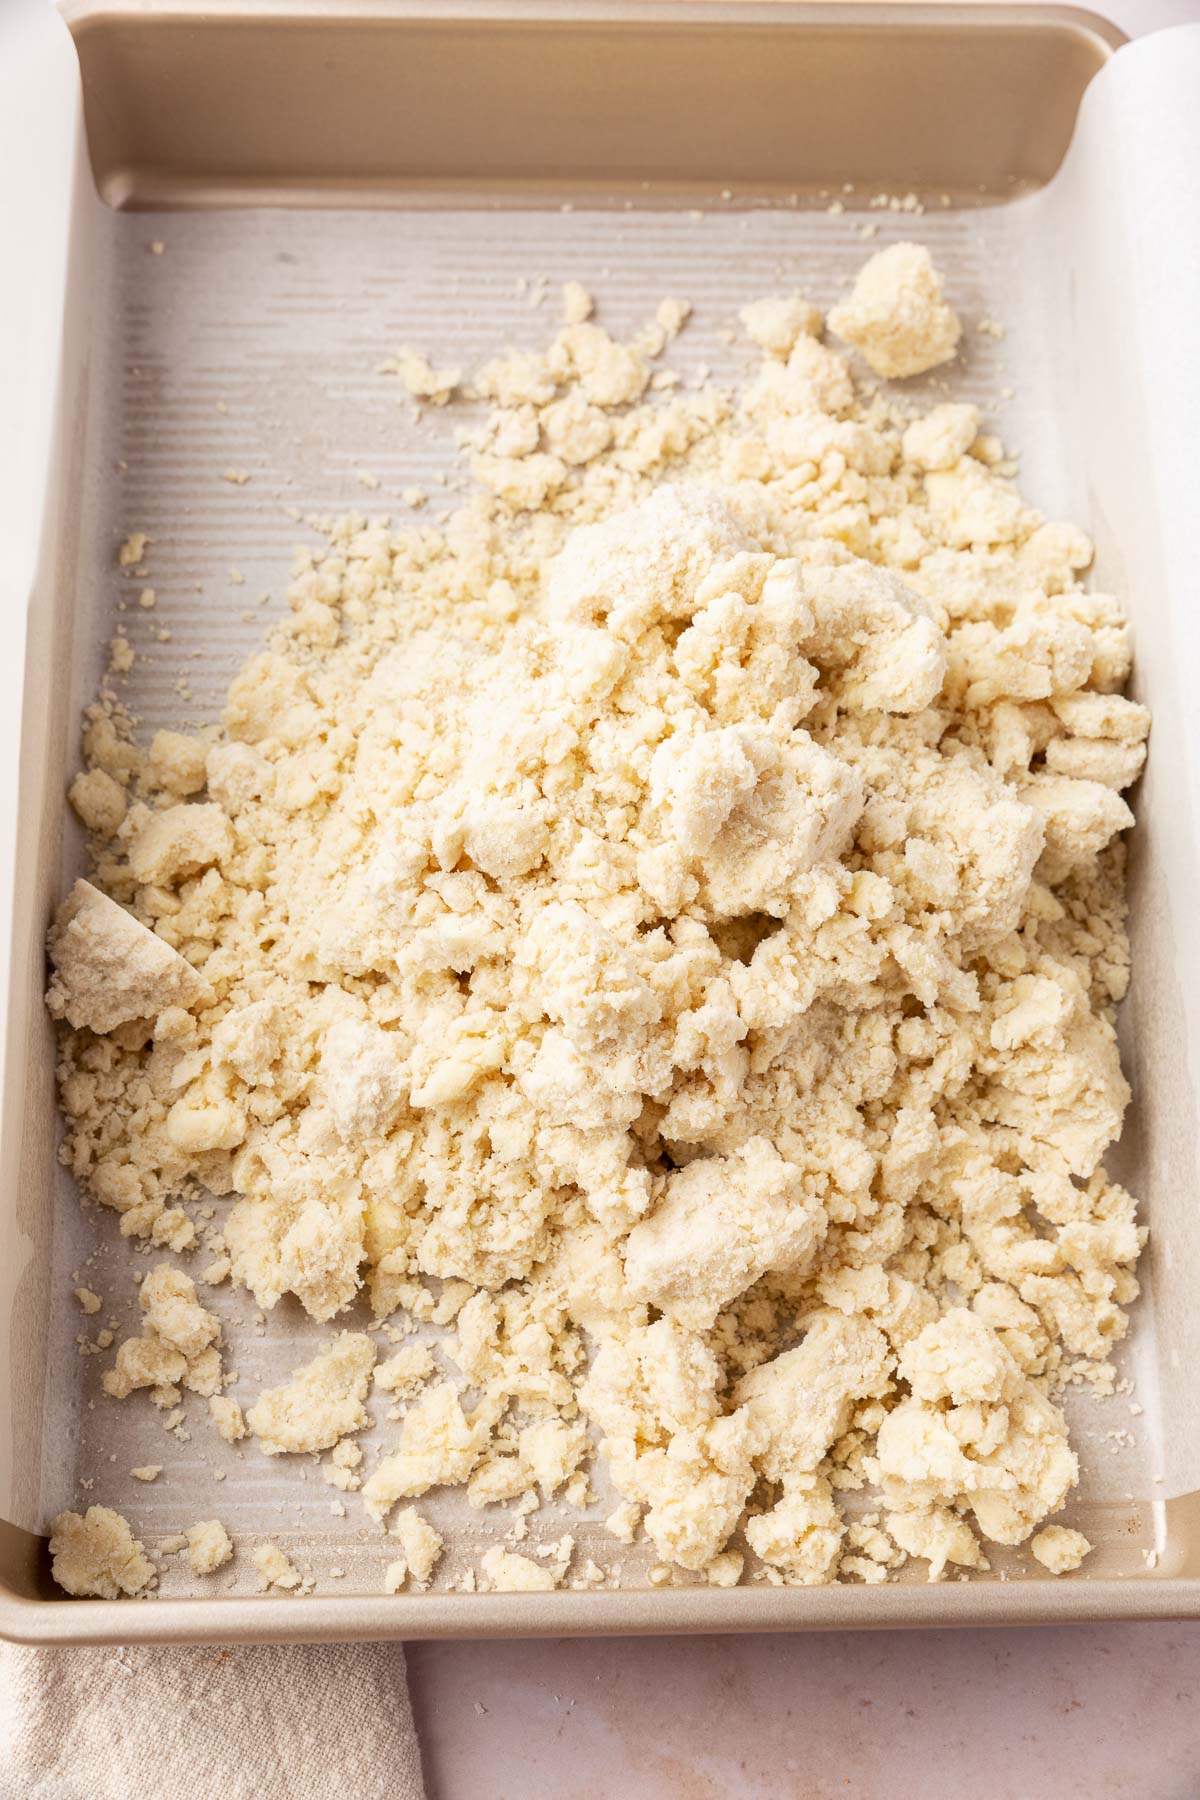 A parchment lined metal baking pan that has a pile of gluten-free shaggy dough to make a shortbread crust layer for cheesecake.